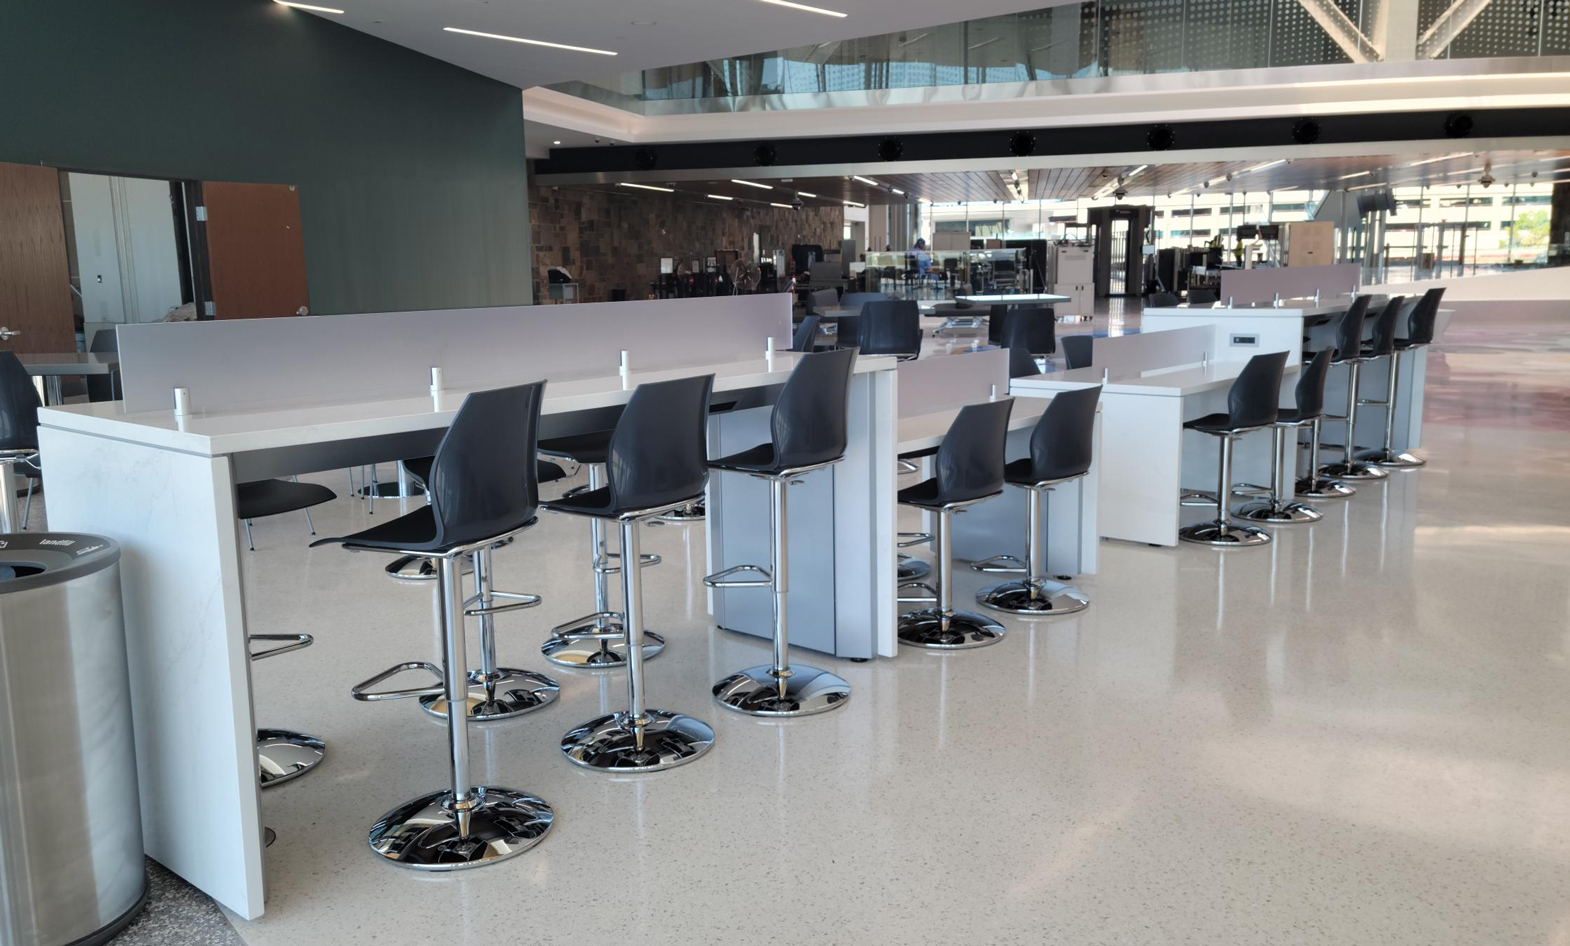 White airport charging table with solid surface tops and panels for passengers to charge devices